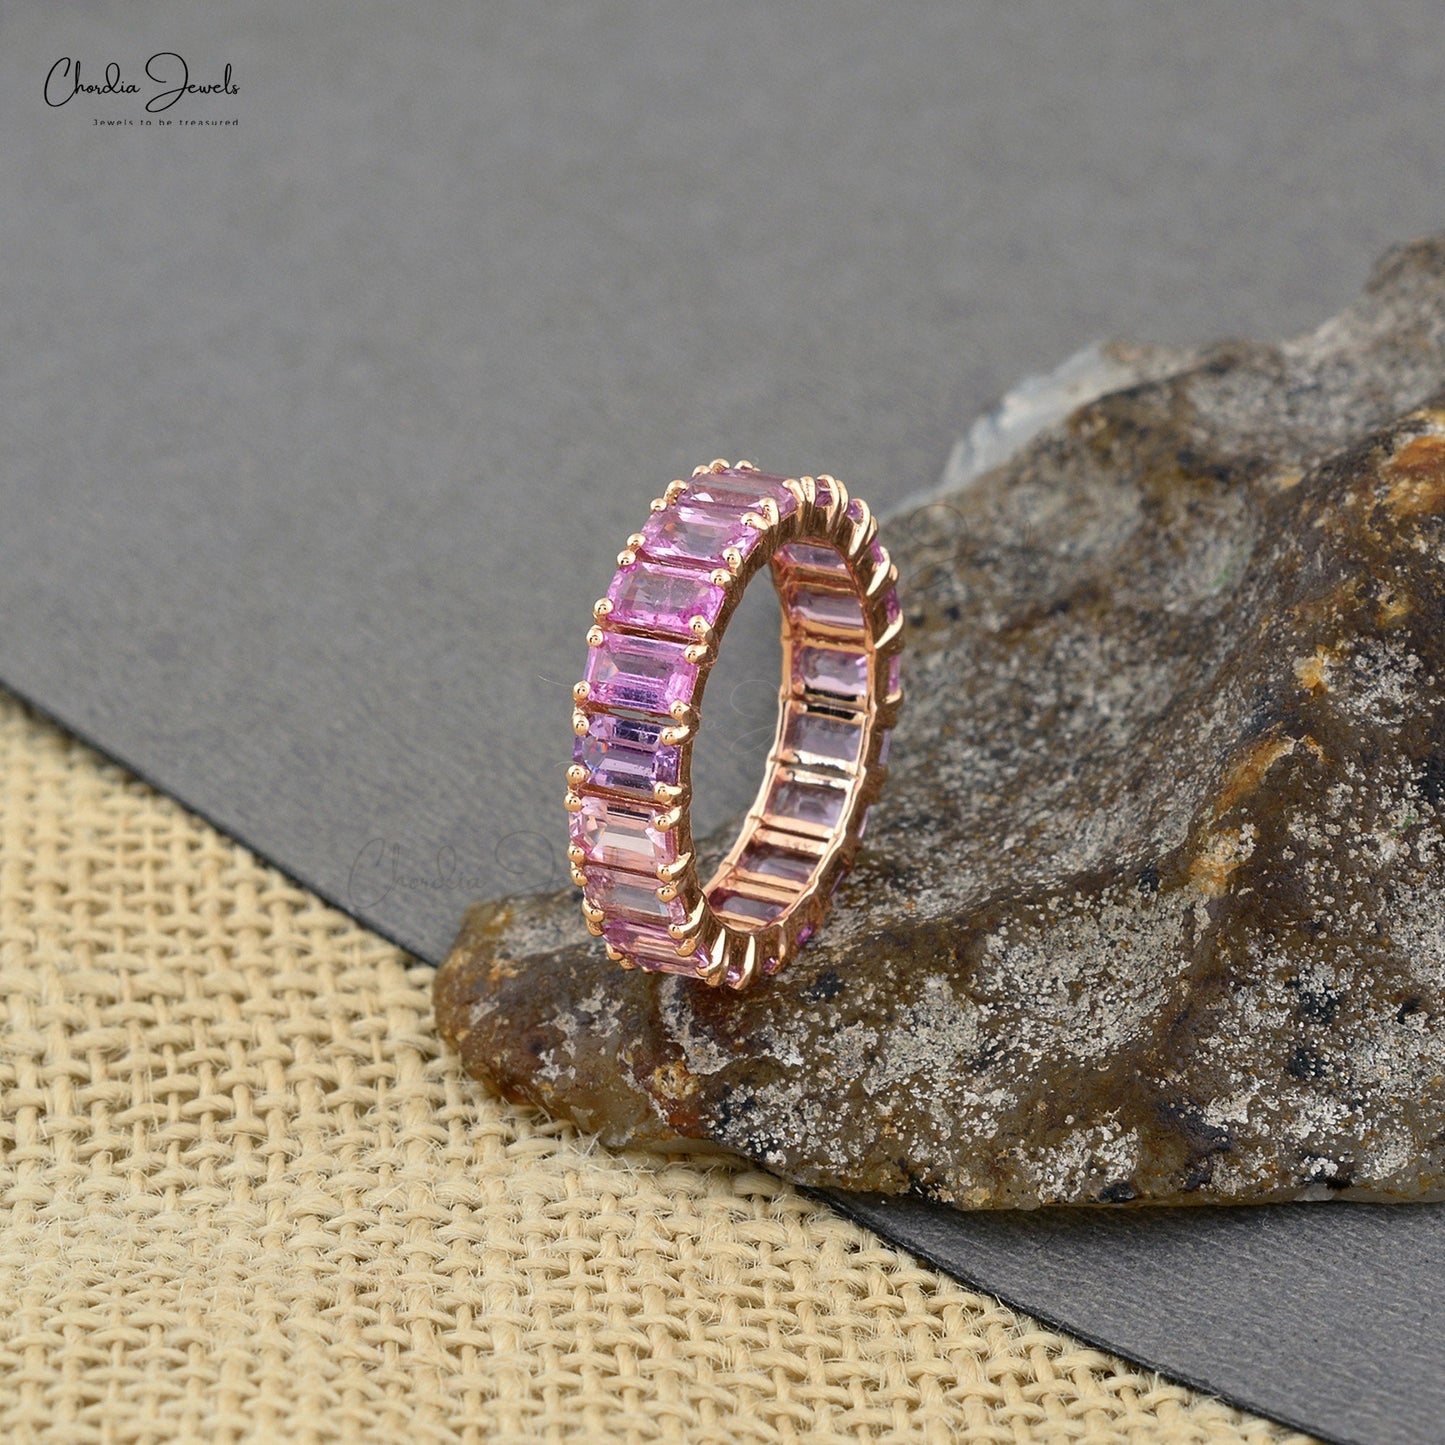 14k Solid Rose Gold Anniversary Ring For Women, 5x3mm Octagon Cut Pink Sapphire Ring Band For Her, September Birthstone Eternity Band Ring, 7.22 Carat Natural Gemstone Ring